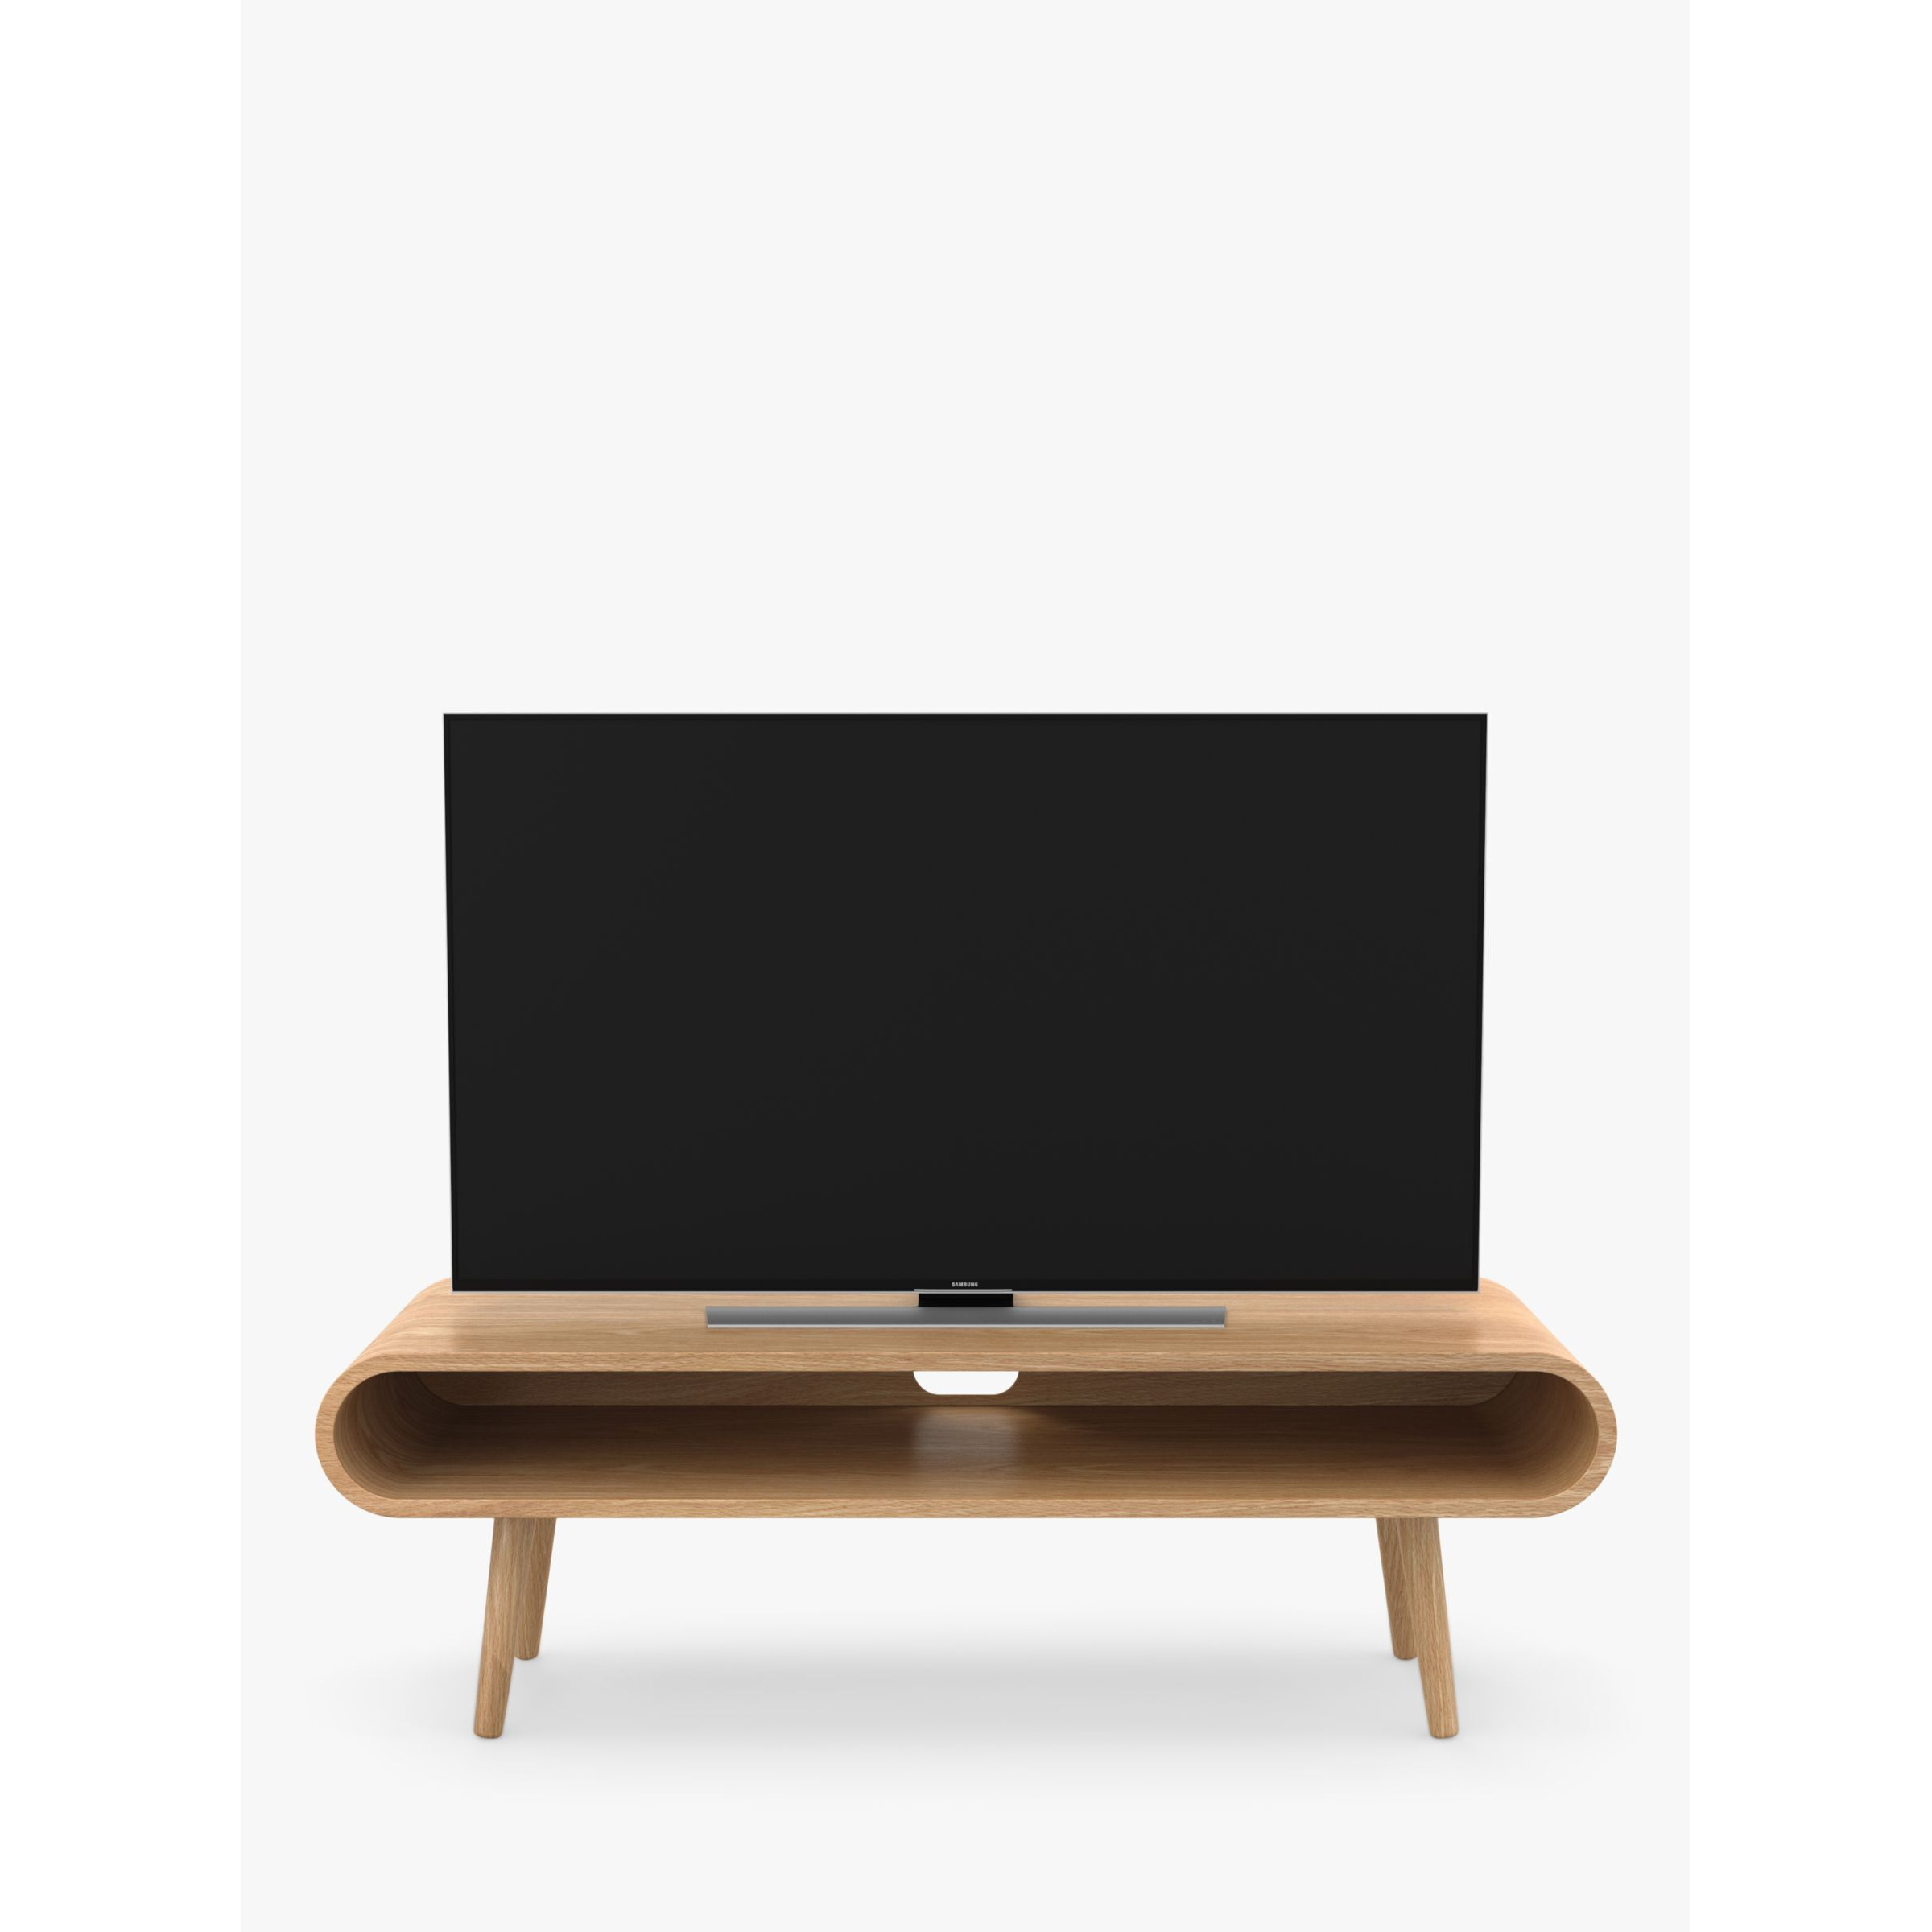 "Tom Schneider Loopy 130 TV Stand for TVs up to 55""" - image 1